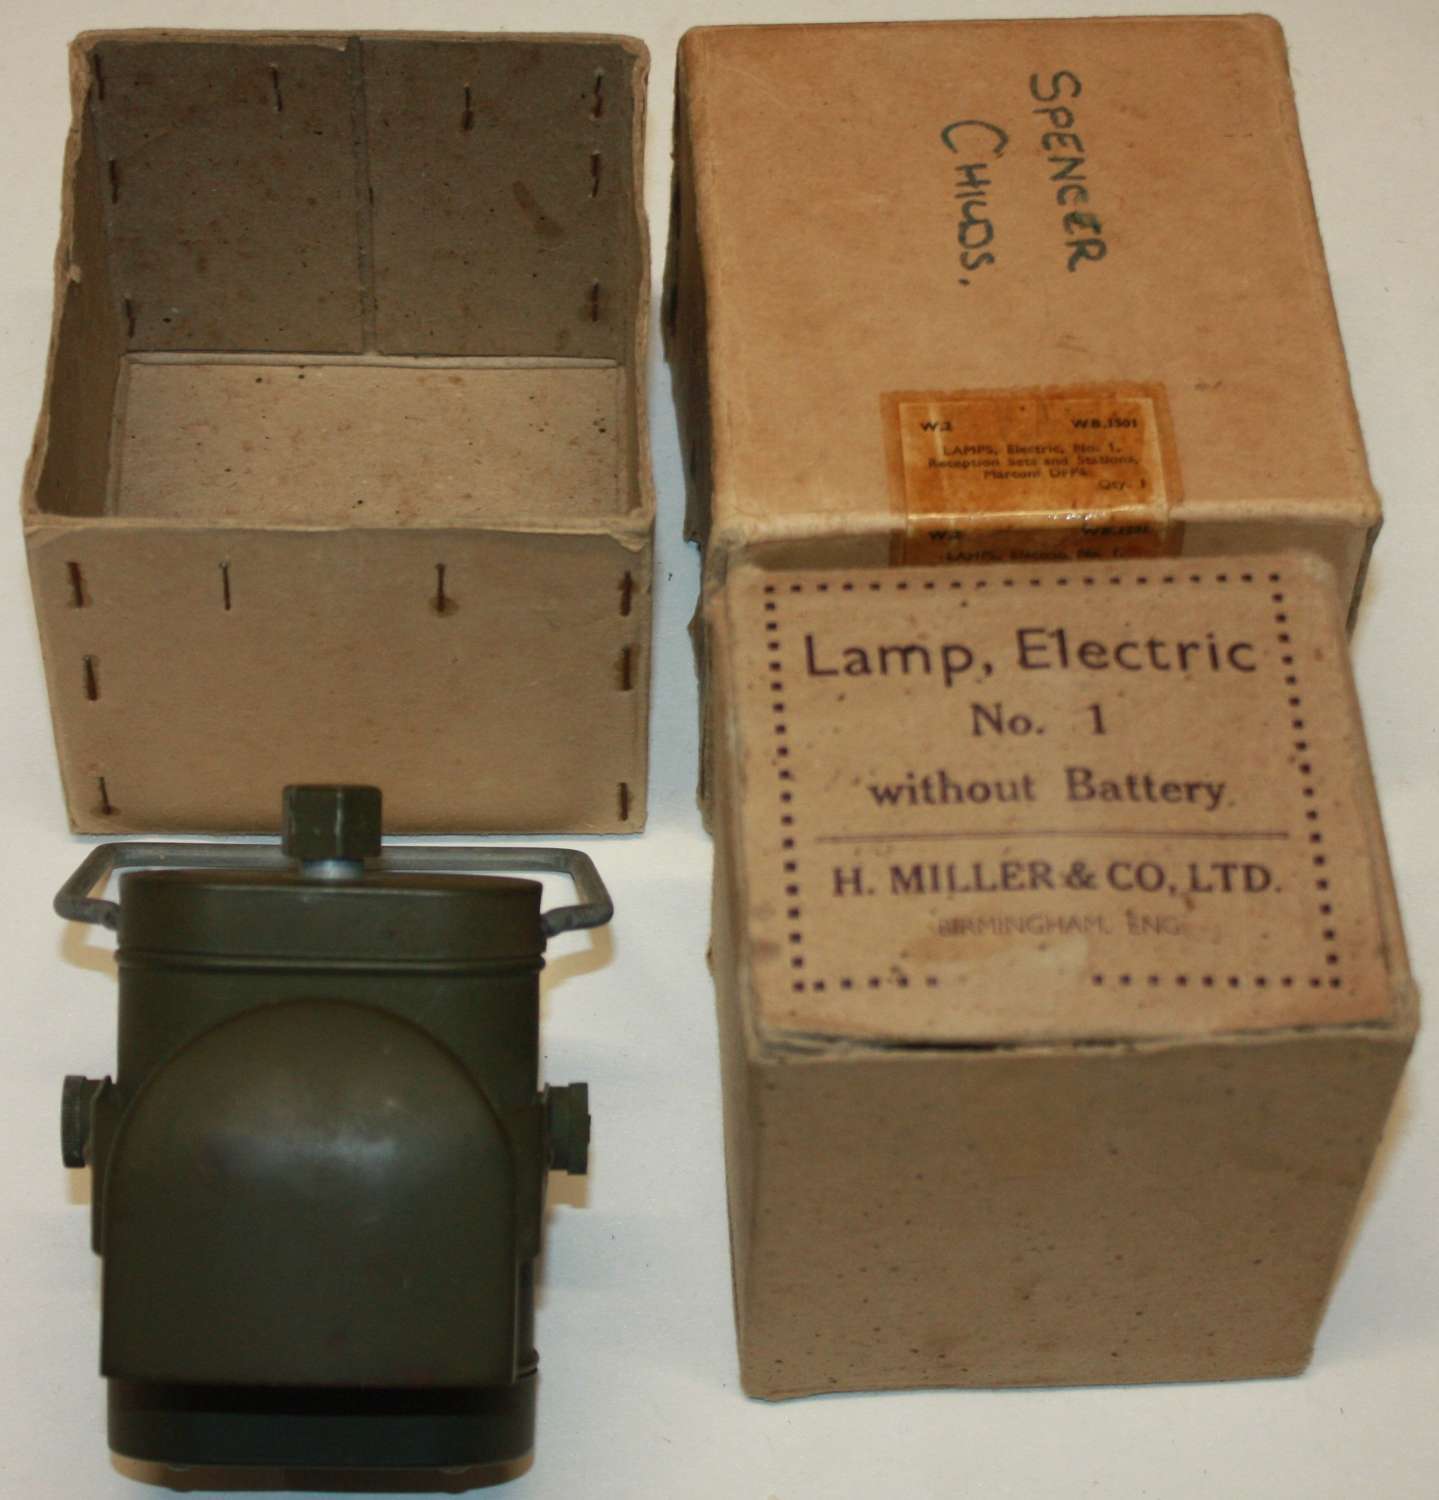 A GOOD EXAMPLE OF THE BRITISH ARMY LAMP NO 1 BOXED